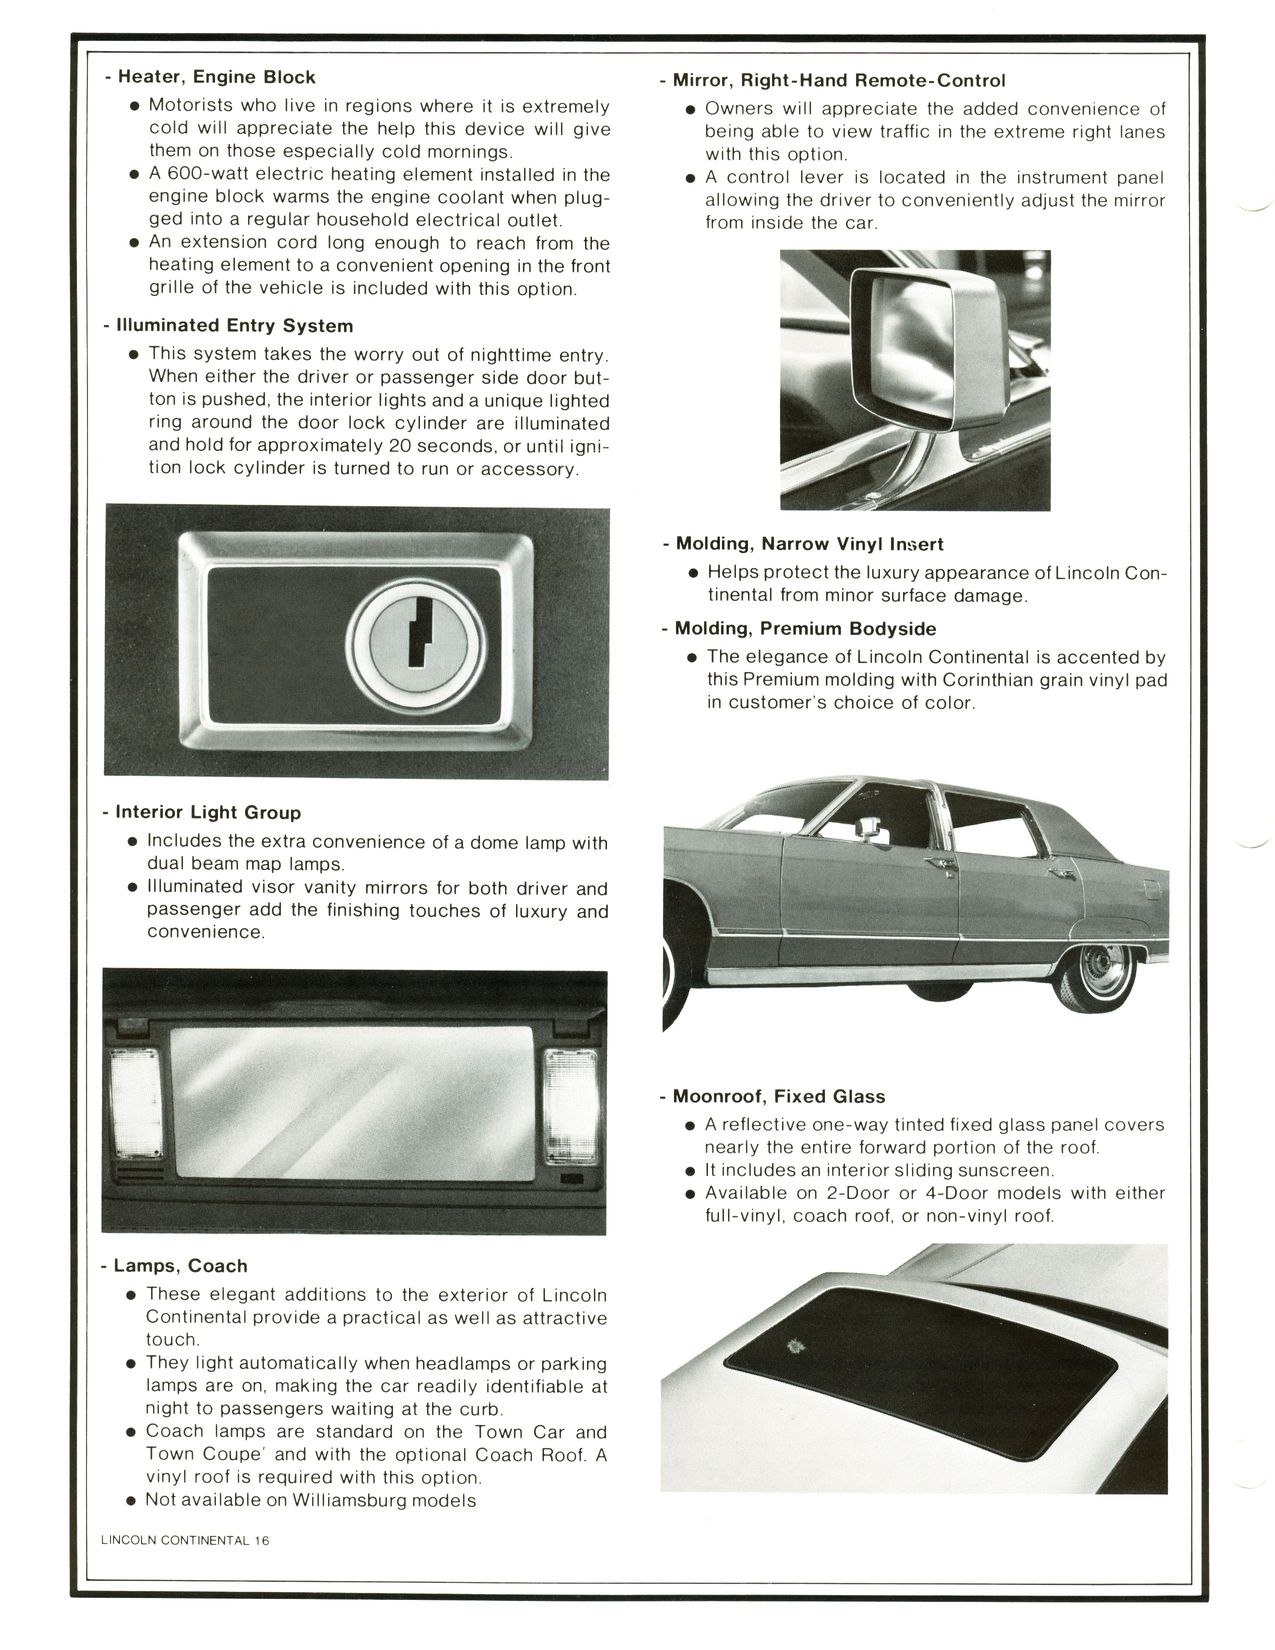 1977 Continental Product Facts Book-2-16